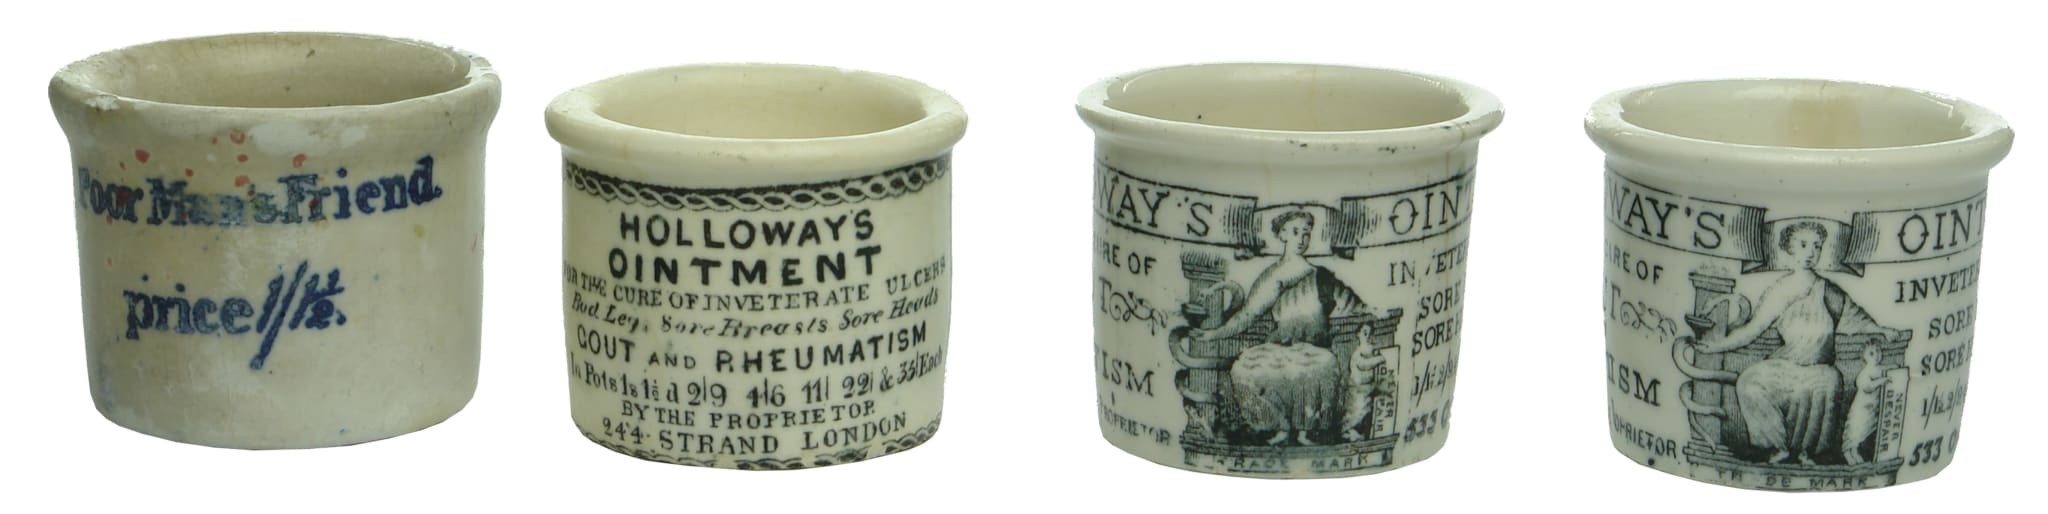 Old Antique Holloways Ointment Pots